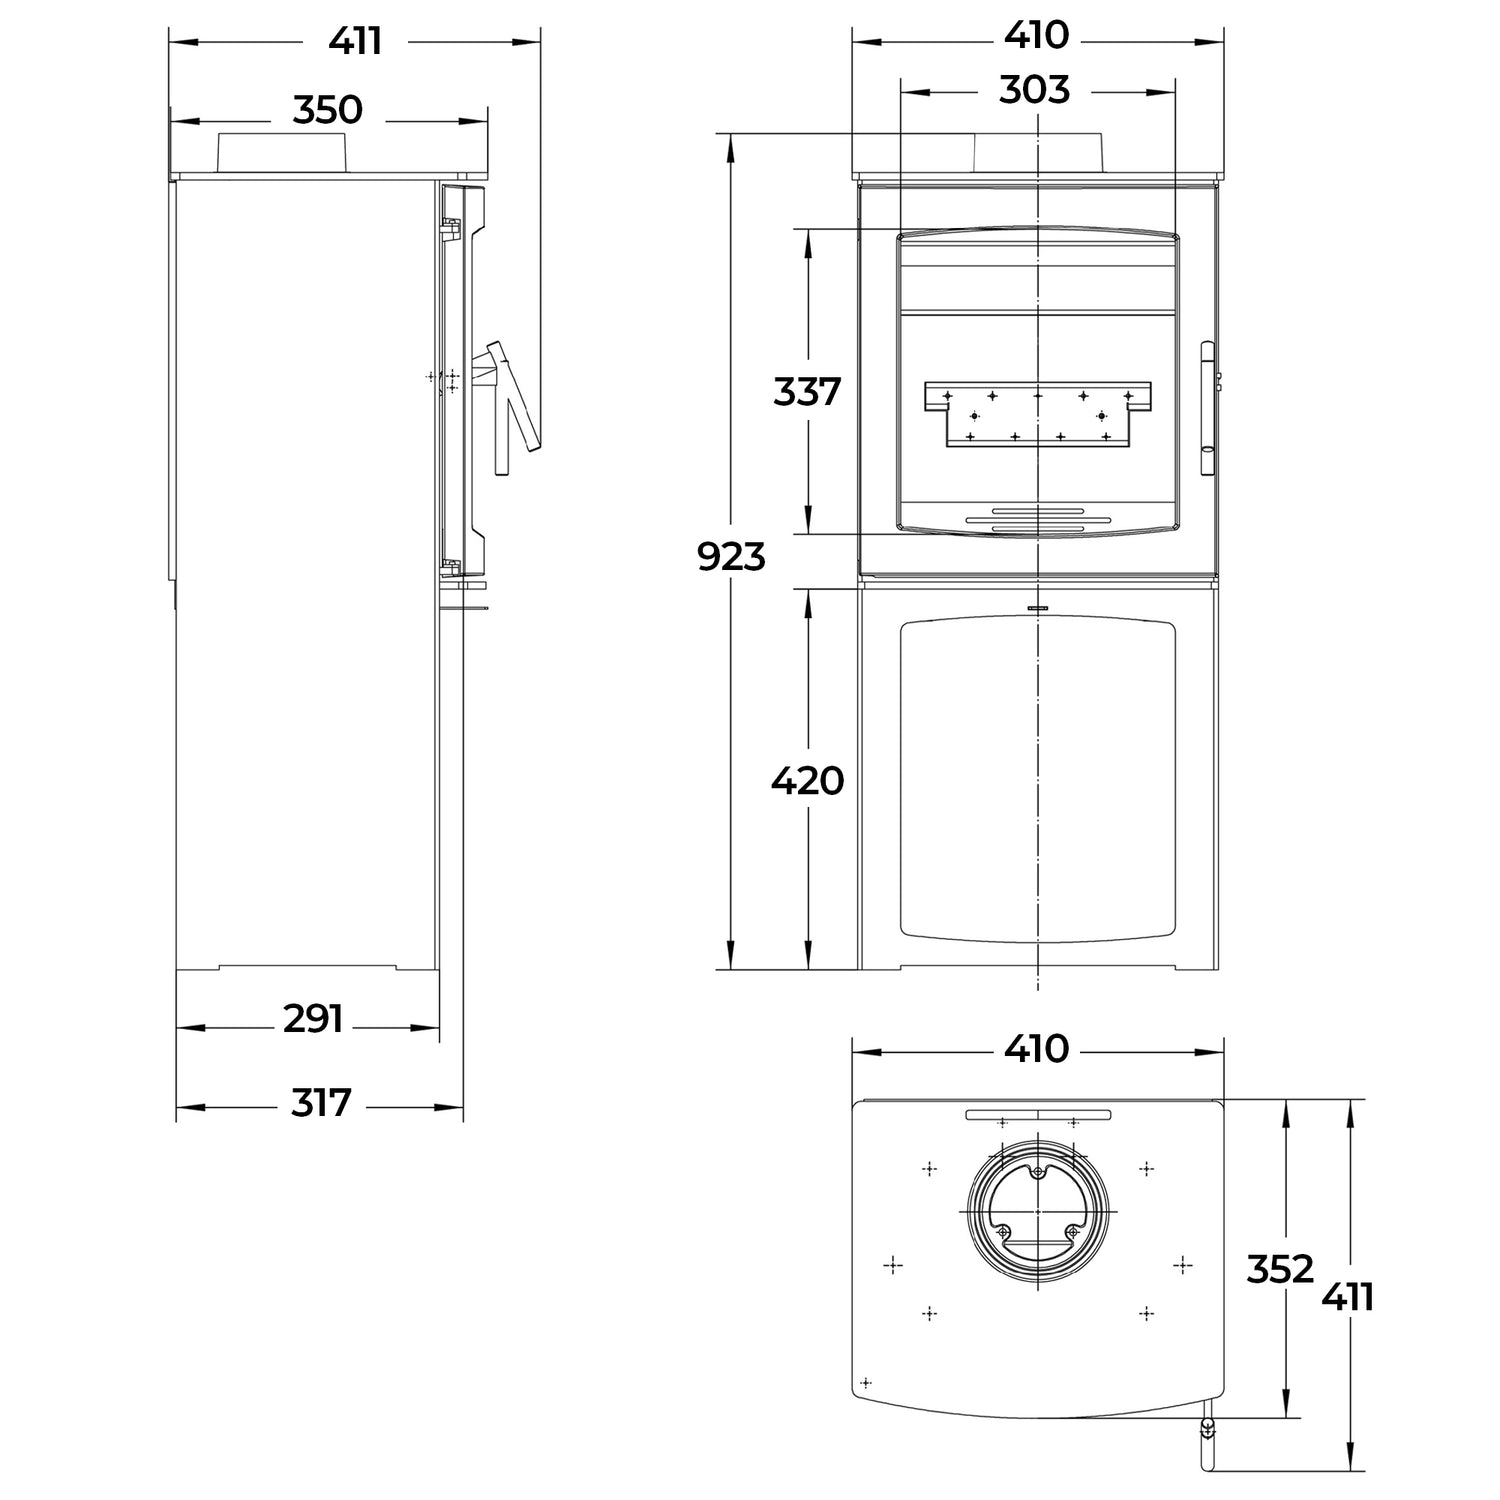 Dimensions and specifications for Medium Tinderbox Wood burning stove on log box.